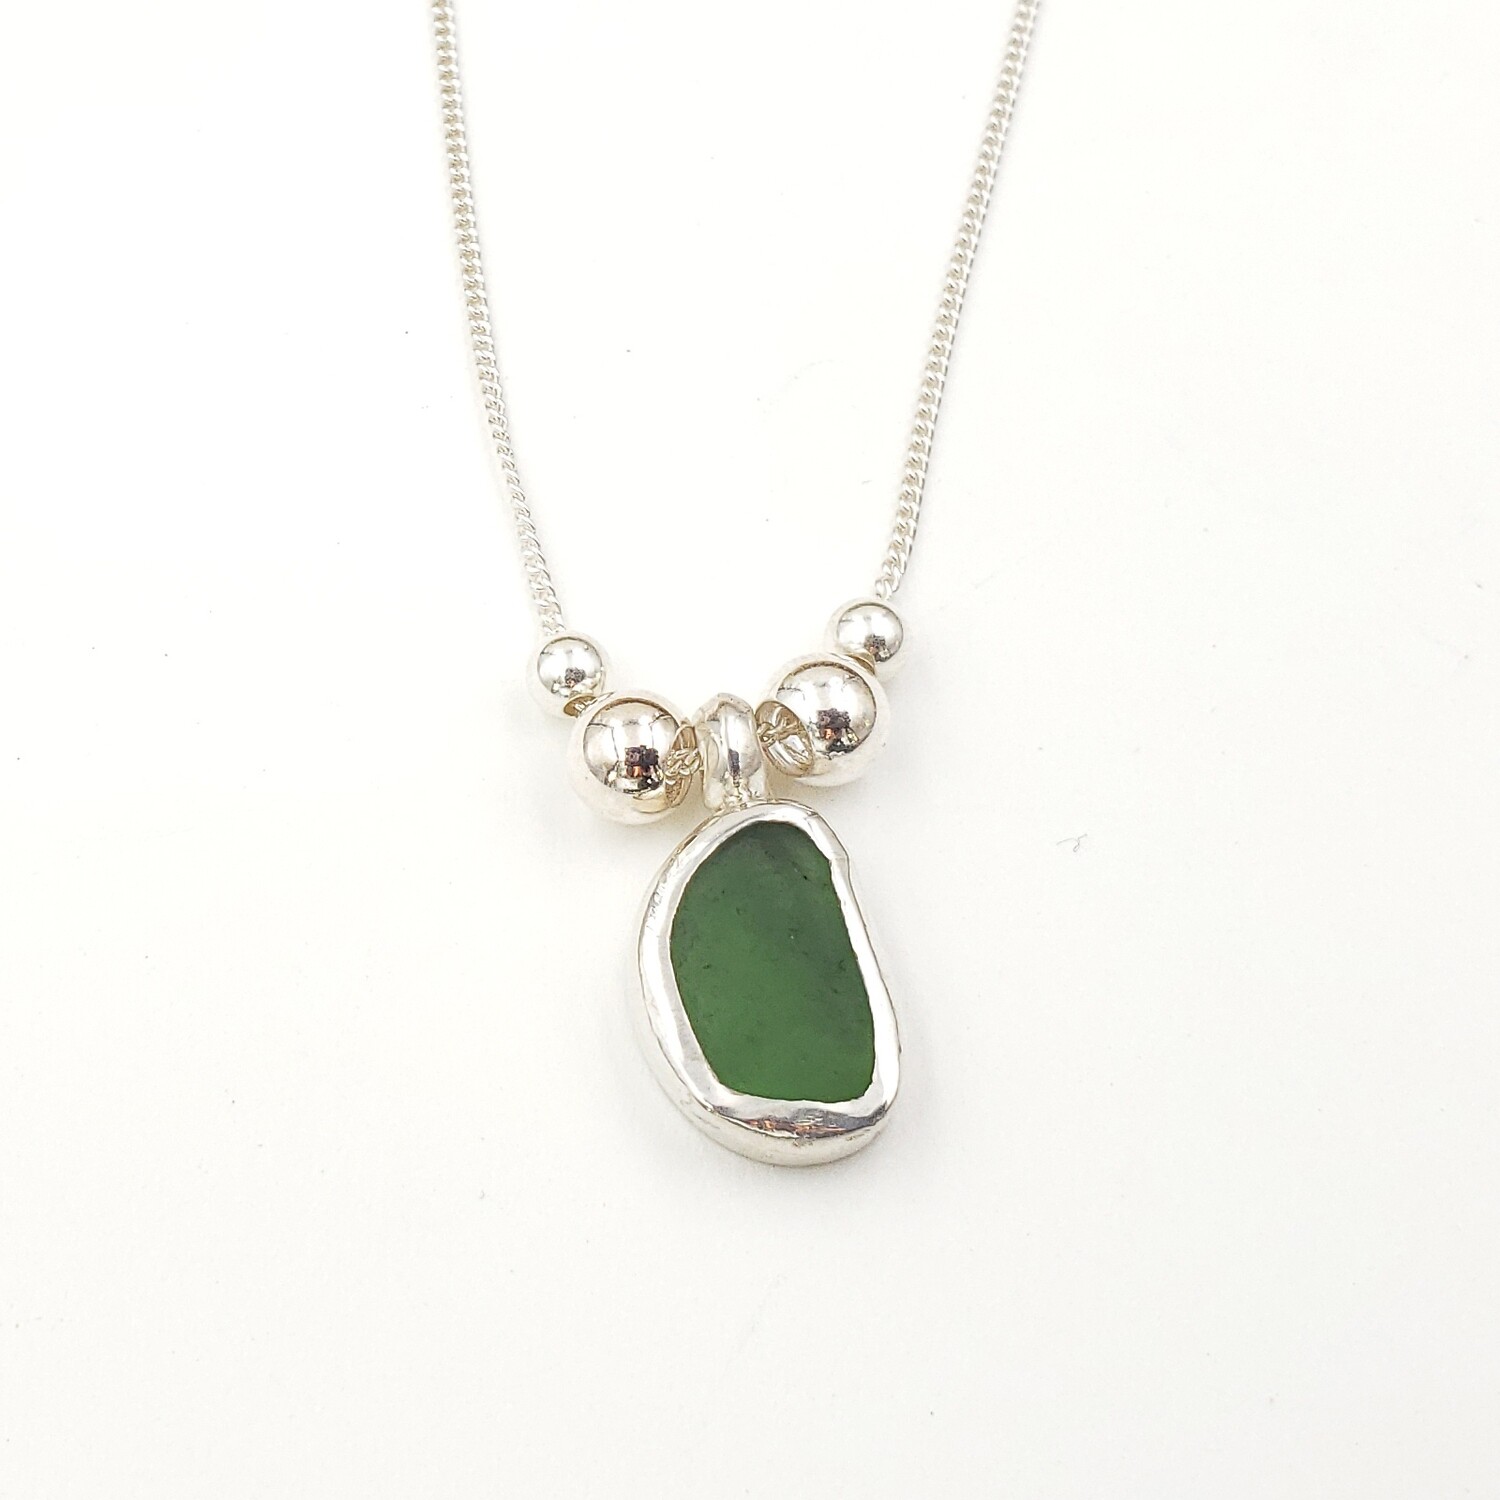 Olive Green Lake Erie Beach Glass Necklace Bezel Set in Sterling Silver with Silver Beads